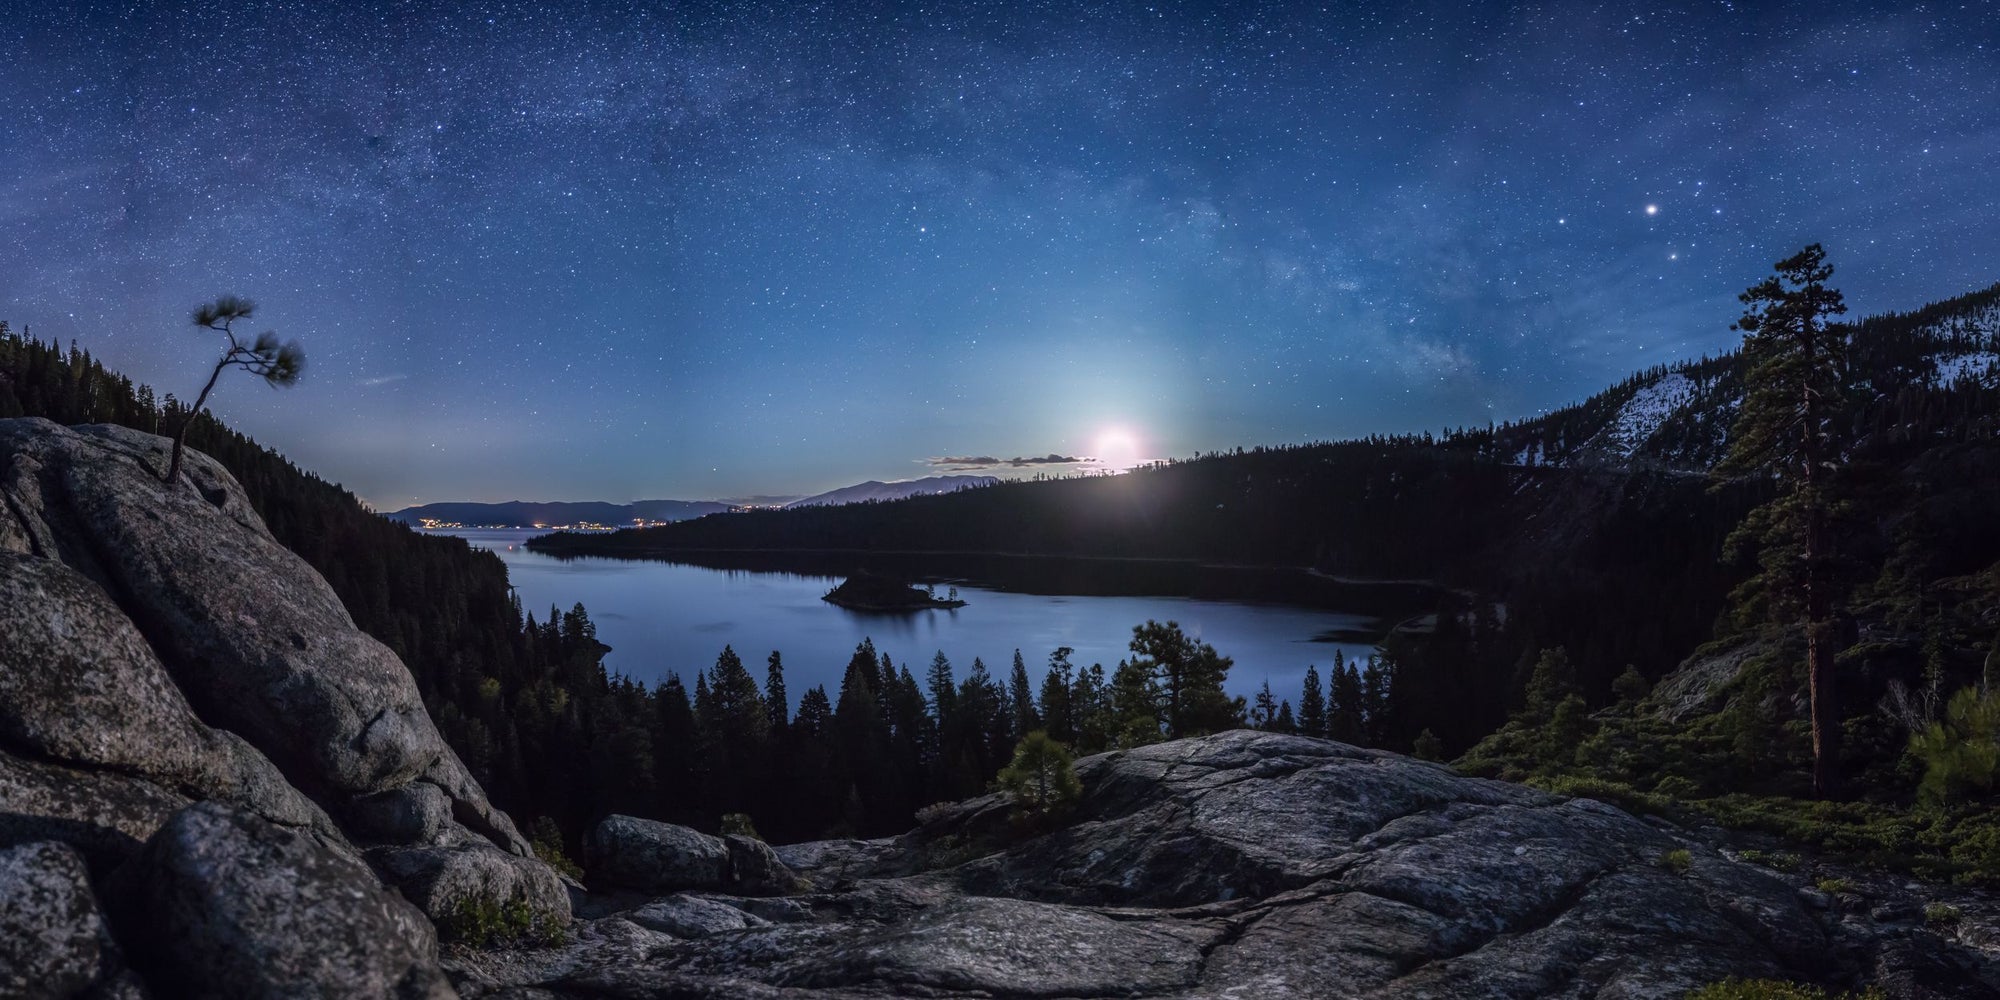 The moon rises over Emerald Bay in Lake Tahoe as the Milky Way arches above.